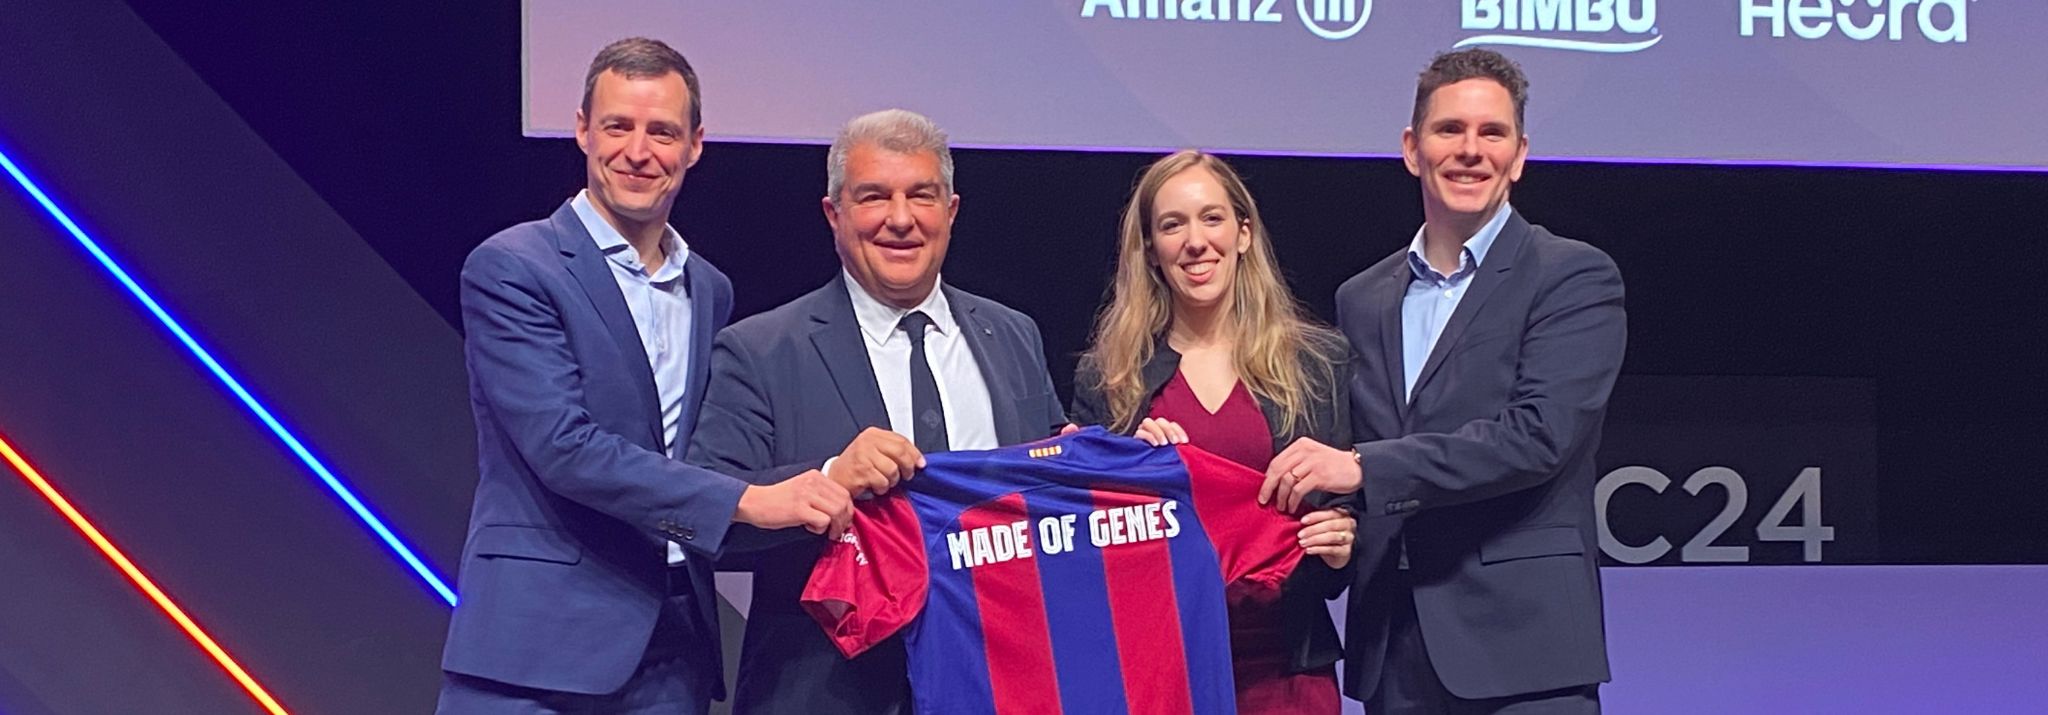 Barça Innovation Hub invests in Made of Genes to develop a cutting-edge biogenetic study with a gender focus